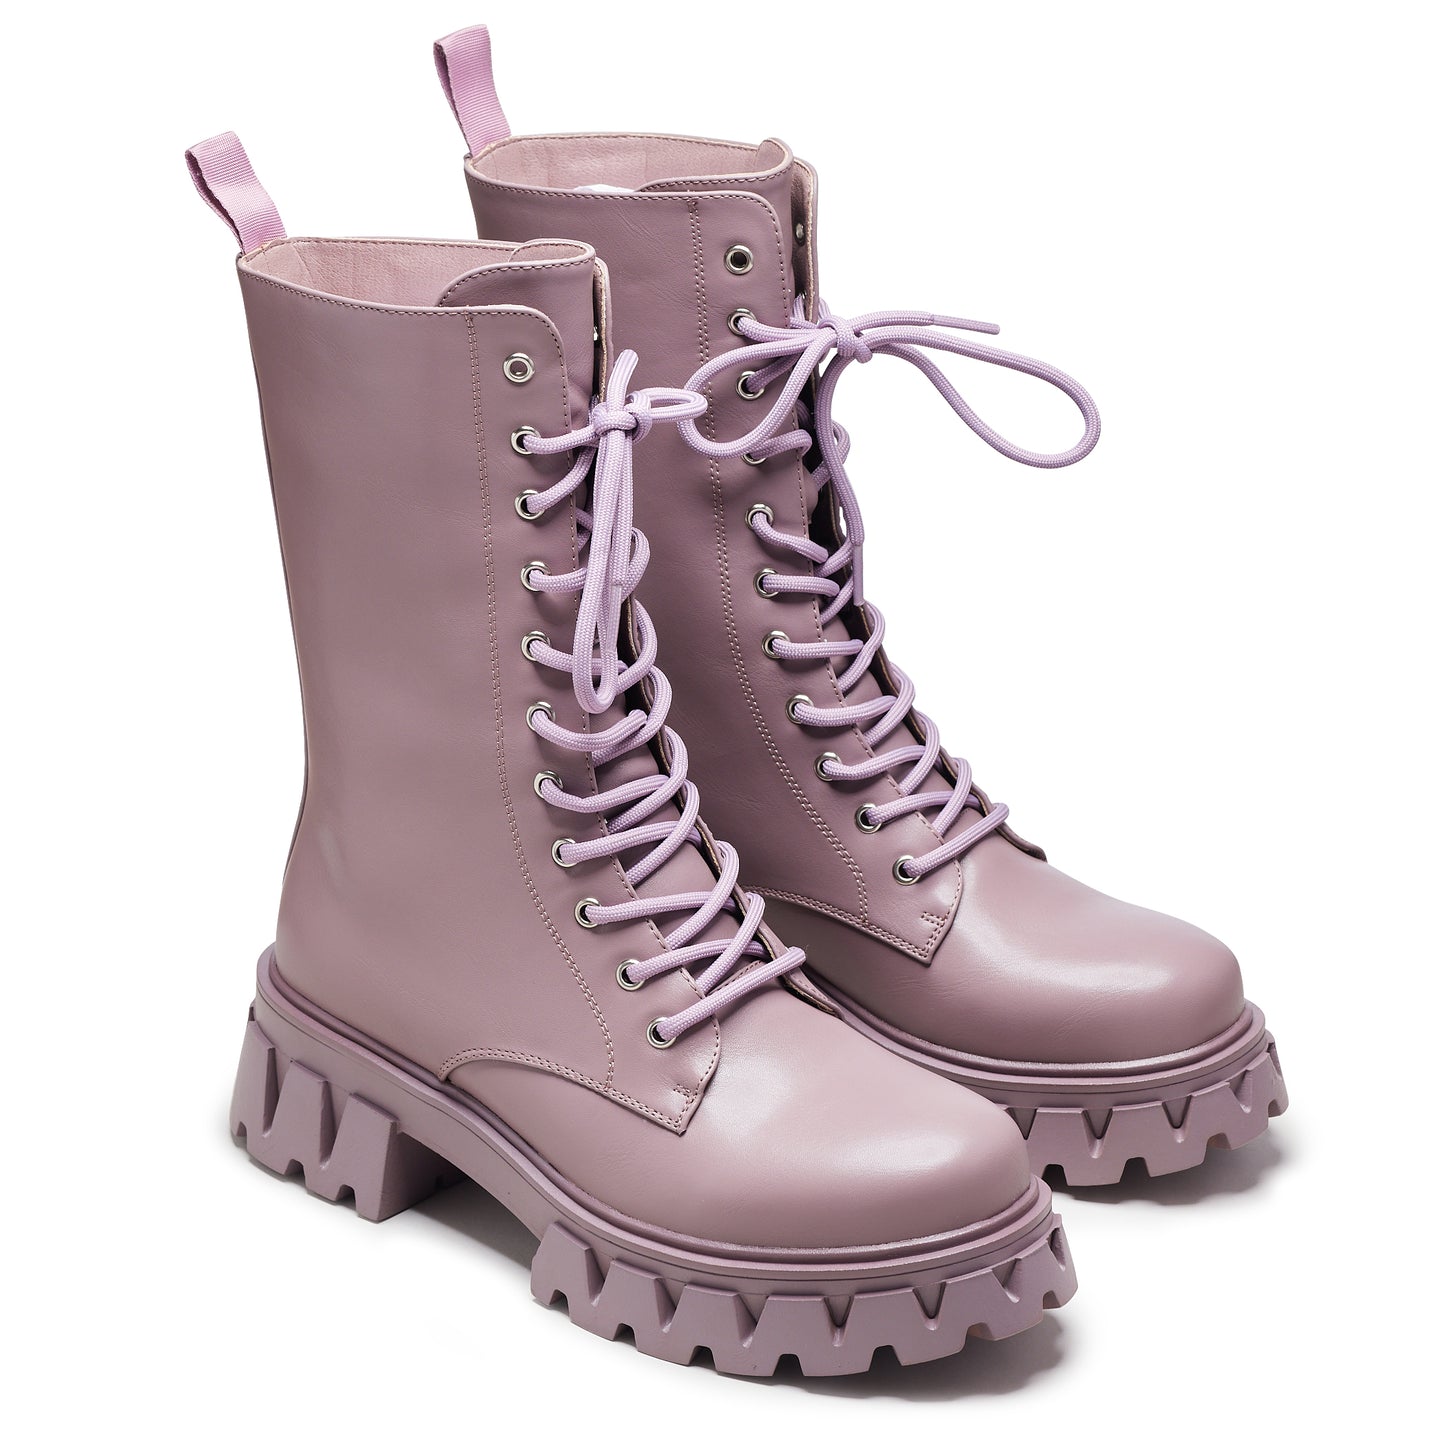 Siren Tall Lace Up Boots - Berry - Ankle Boots - KOI Footwear - Purple - Three-Quarter View